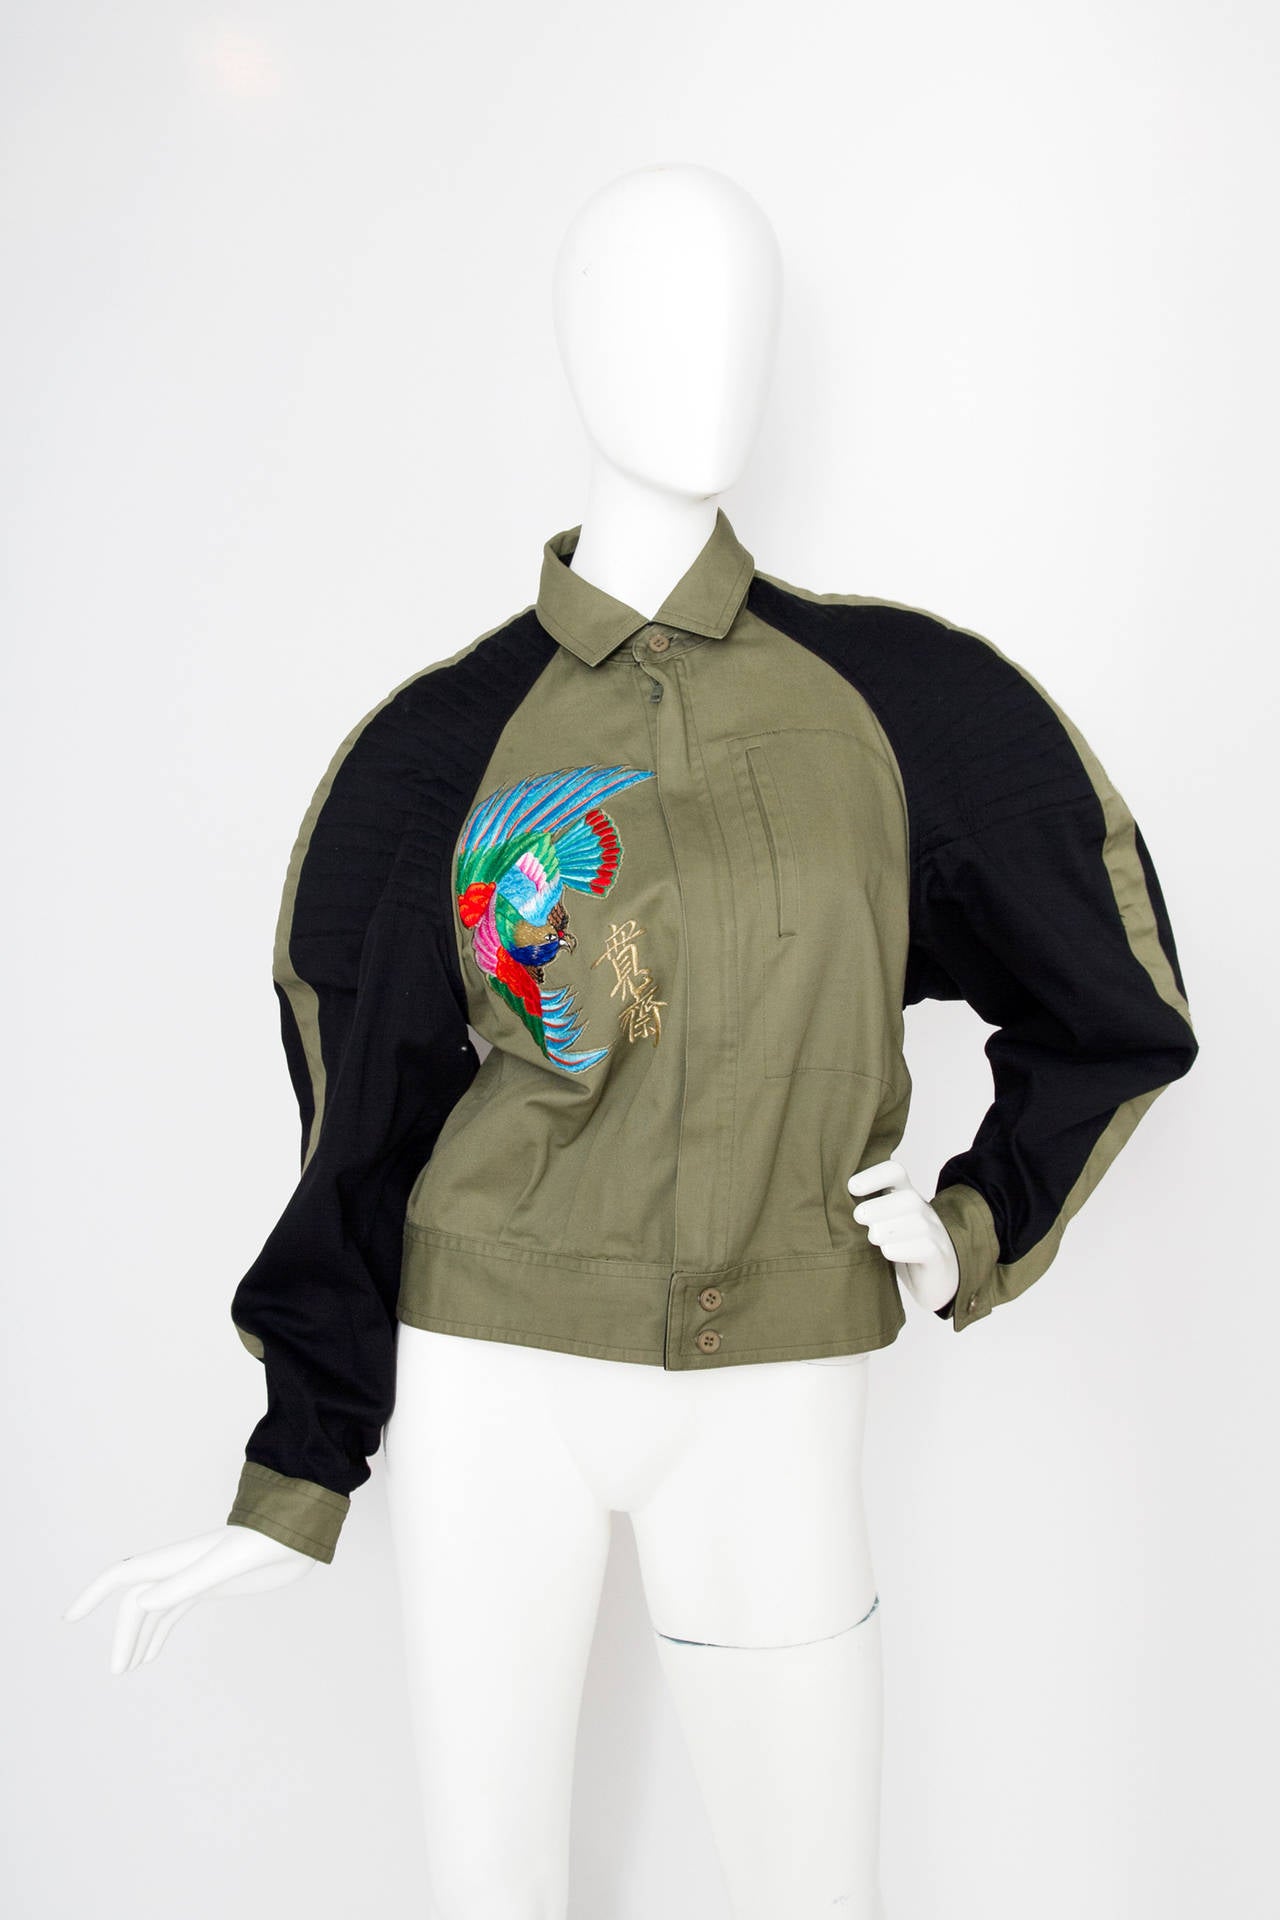 A 1980s Kansai Yamamoto cropped cotton bomber jacket with an extravagant embroidered bird pattern placed both on the front and on the back. The army green jacket has black panels on the sleeves and linear quit detailing on the shoulders. The jacket